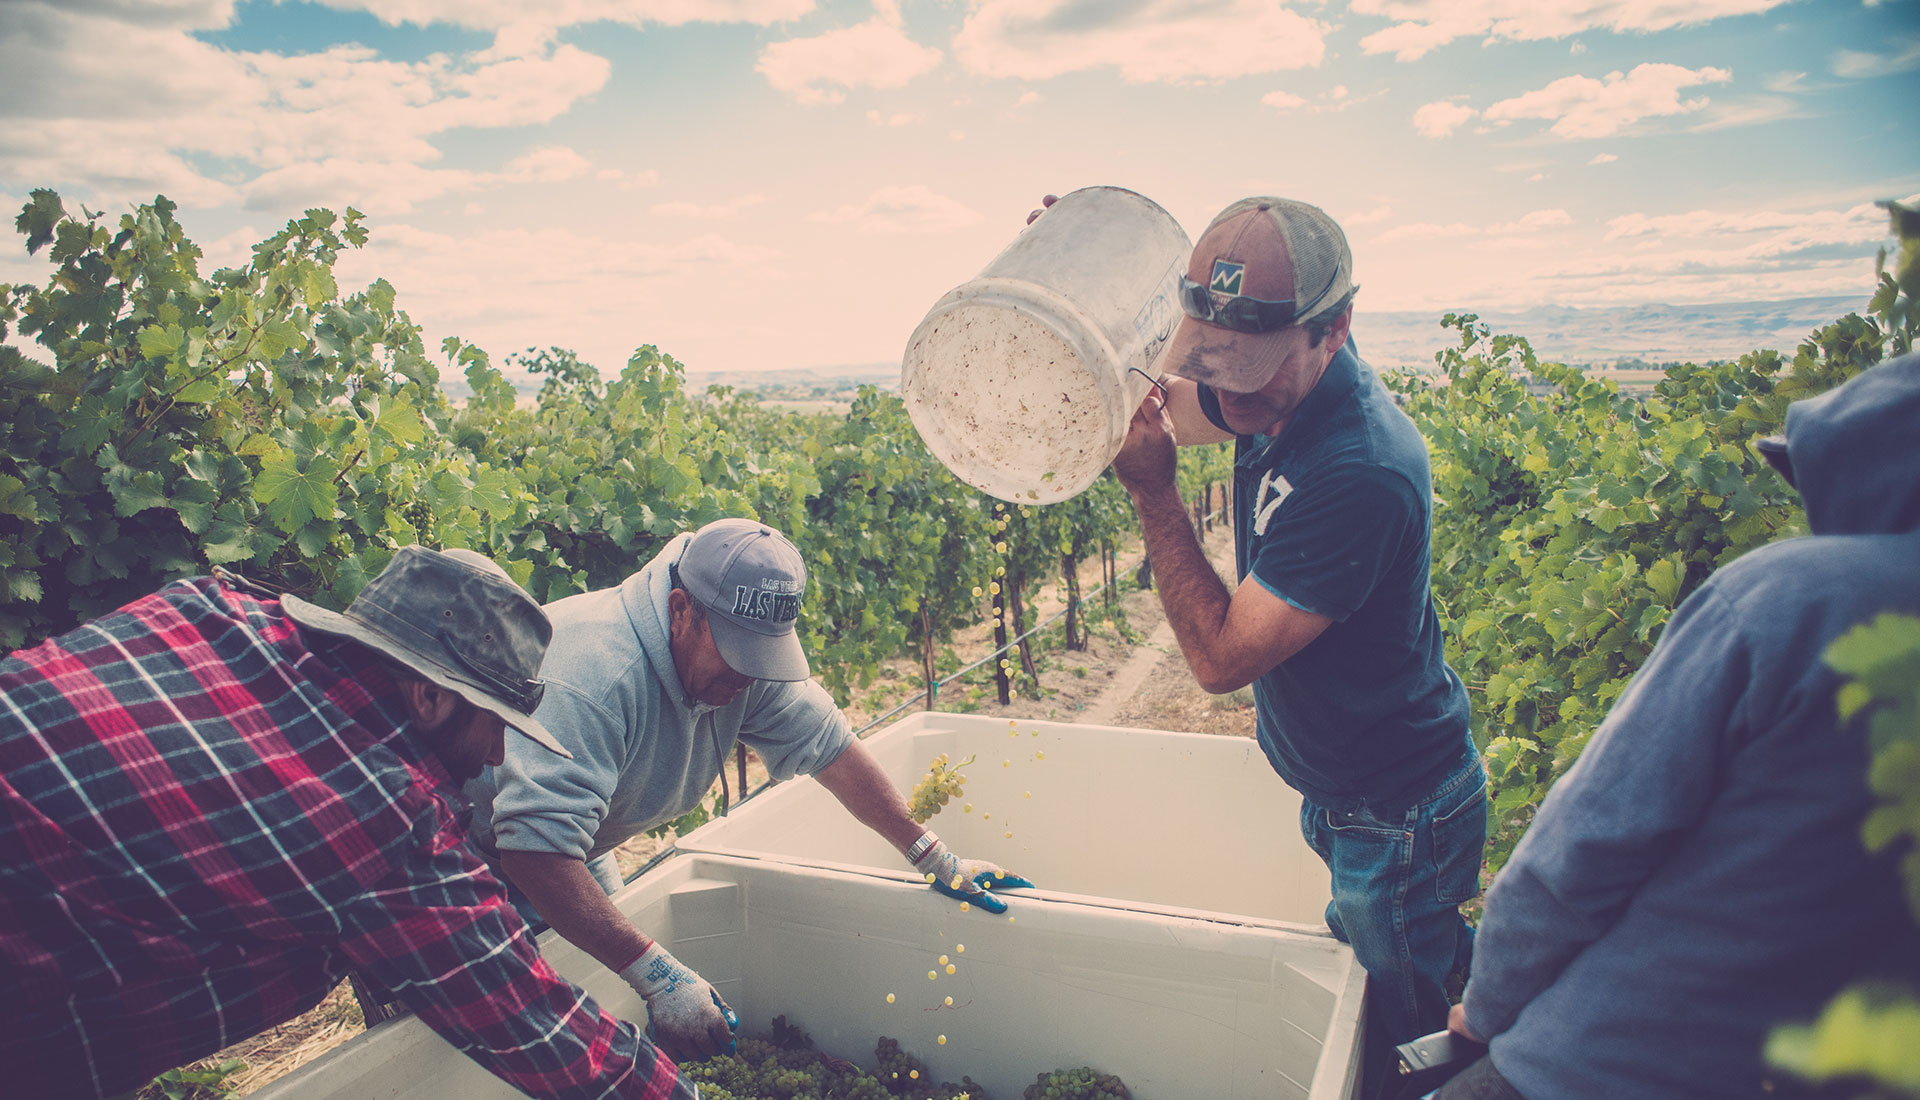 Four people in a vineyard harvesting grapes